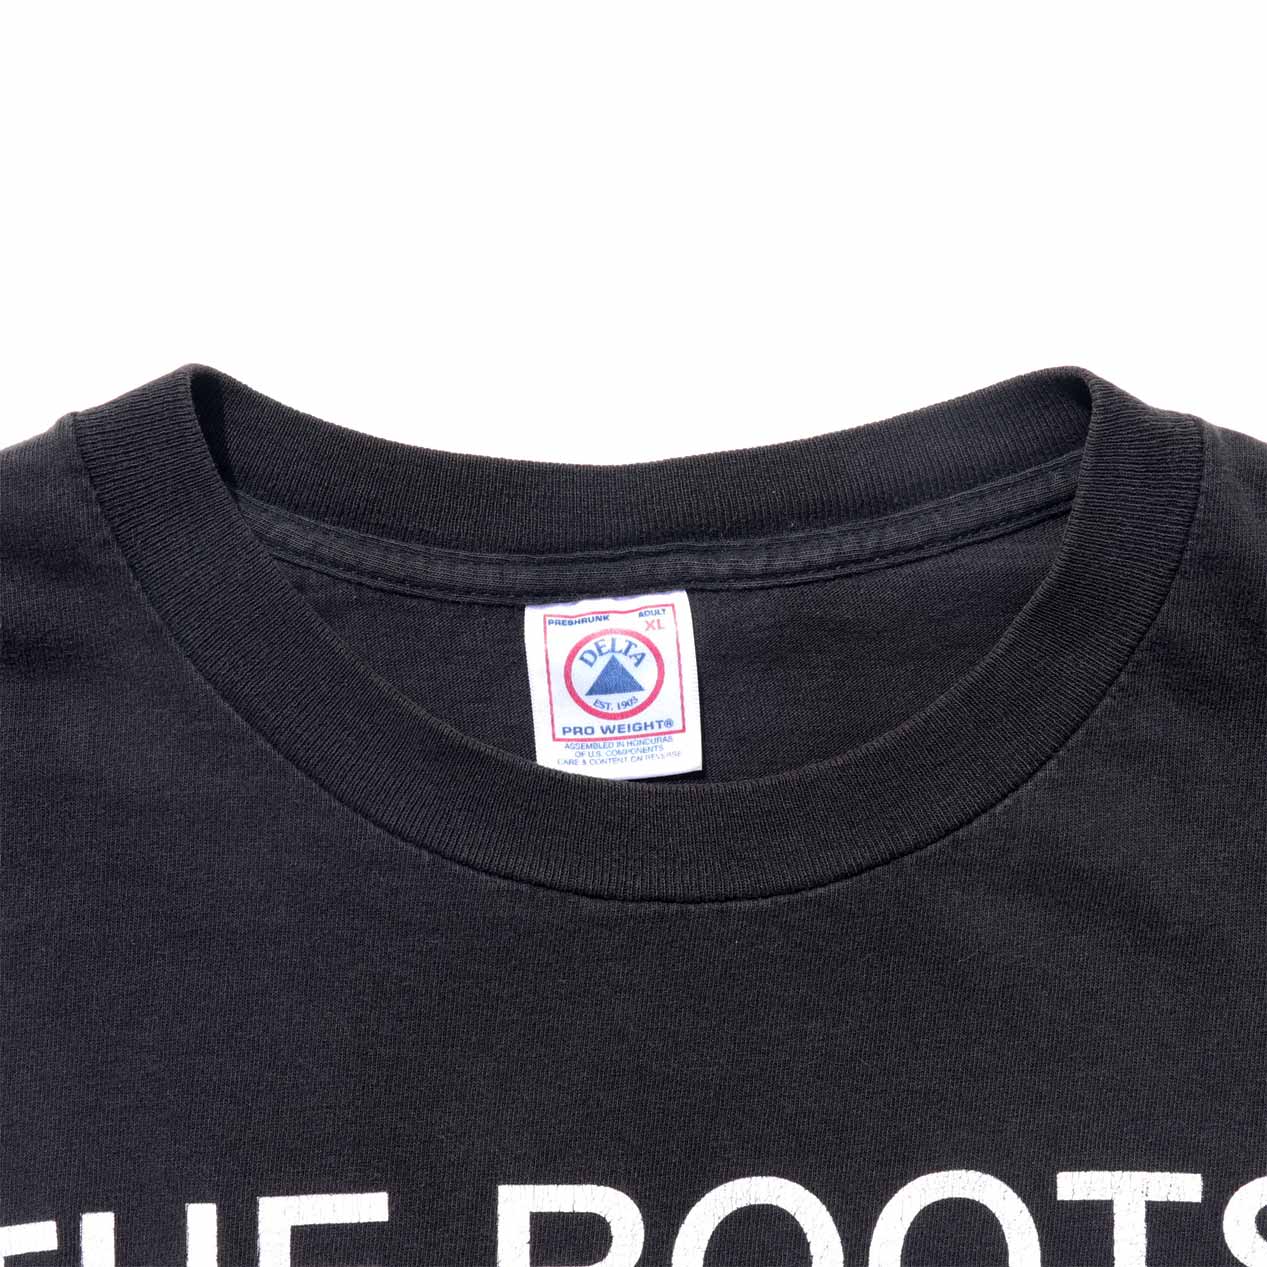 POST JUNK / 90's THE ROOTS ”THINGS FALL APART” プリントTシャツ [XL]